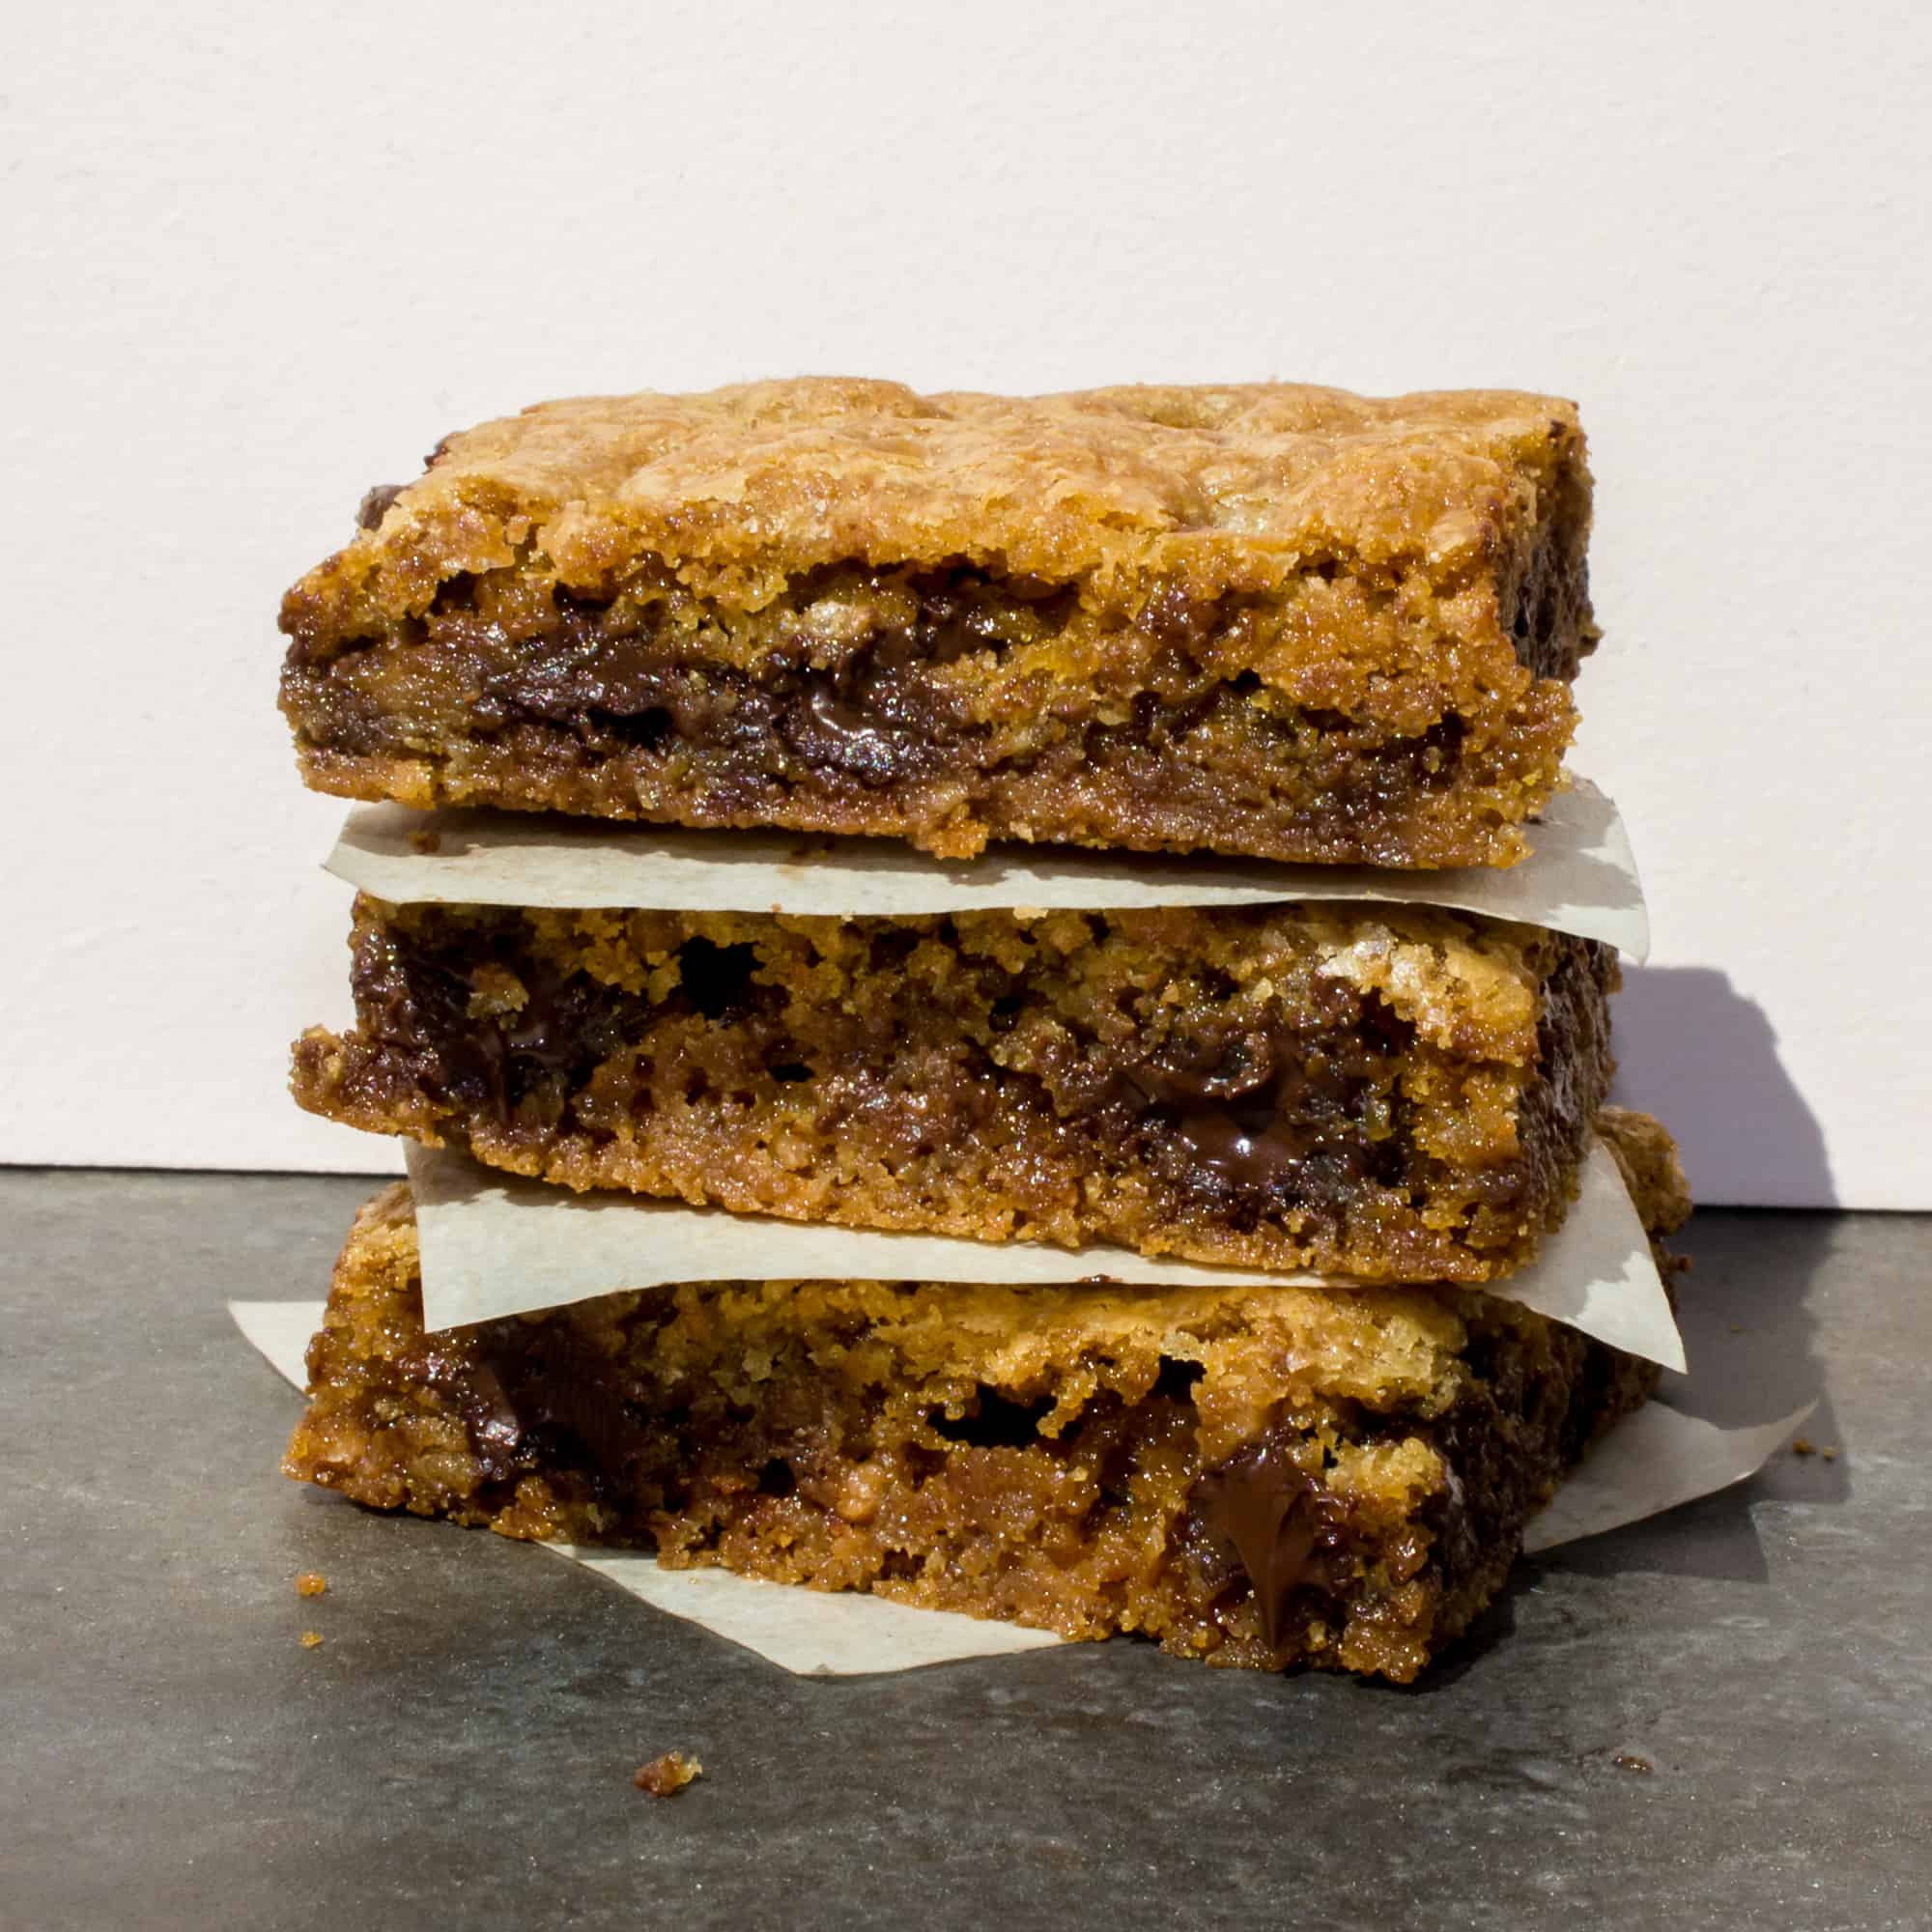 Classic chocolate chip recipe with Skor butter crunch toffee pressed on a sheet, baked and cut into bars. These cookie squares go great with coffee or milk.